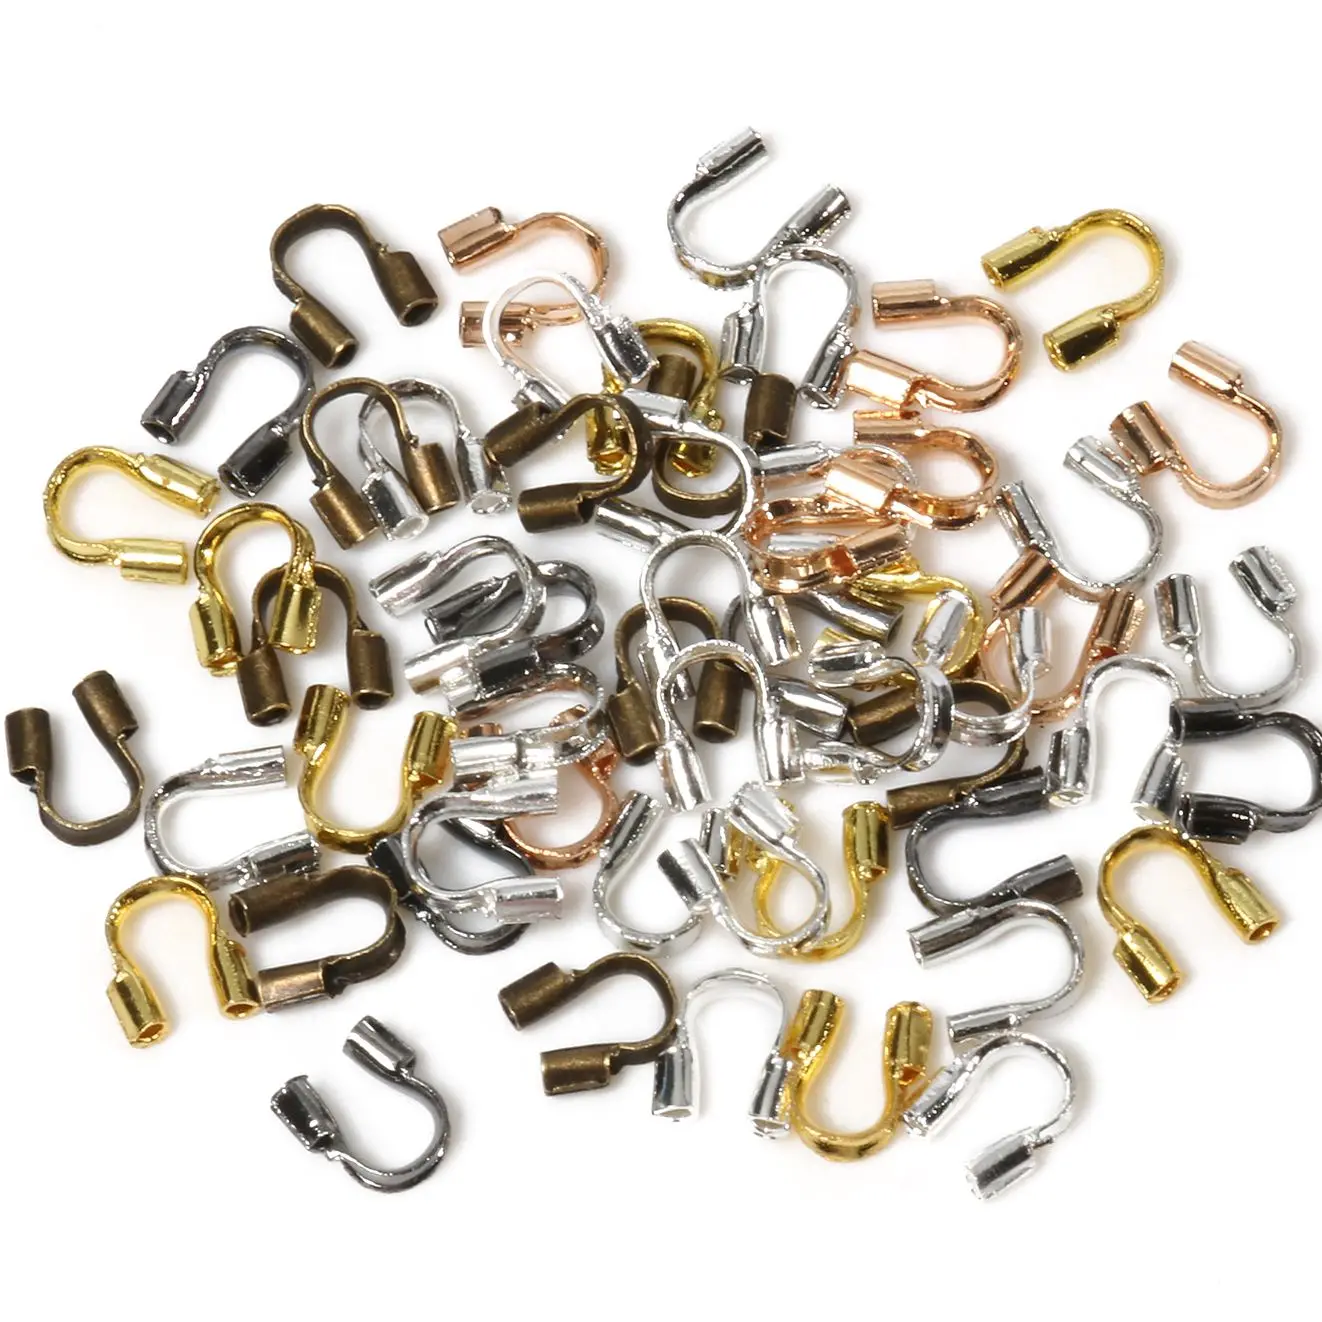 500pcs 4.5x4mm Wire Protectors Wire Guard Guardian Protectors loops U Shape Accessories Clasps Connector For Jewelry Making DIY